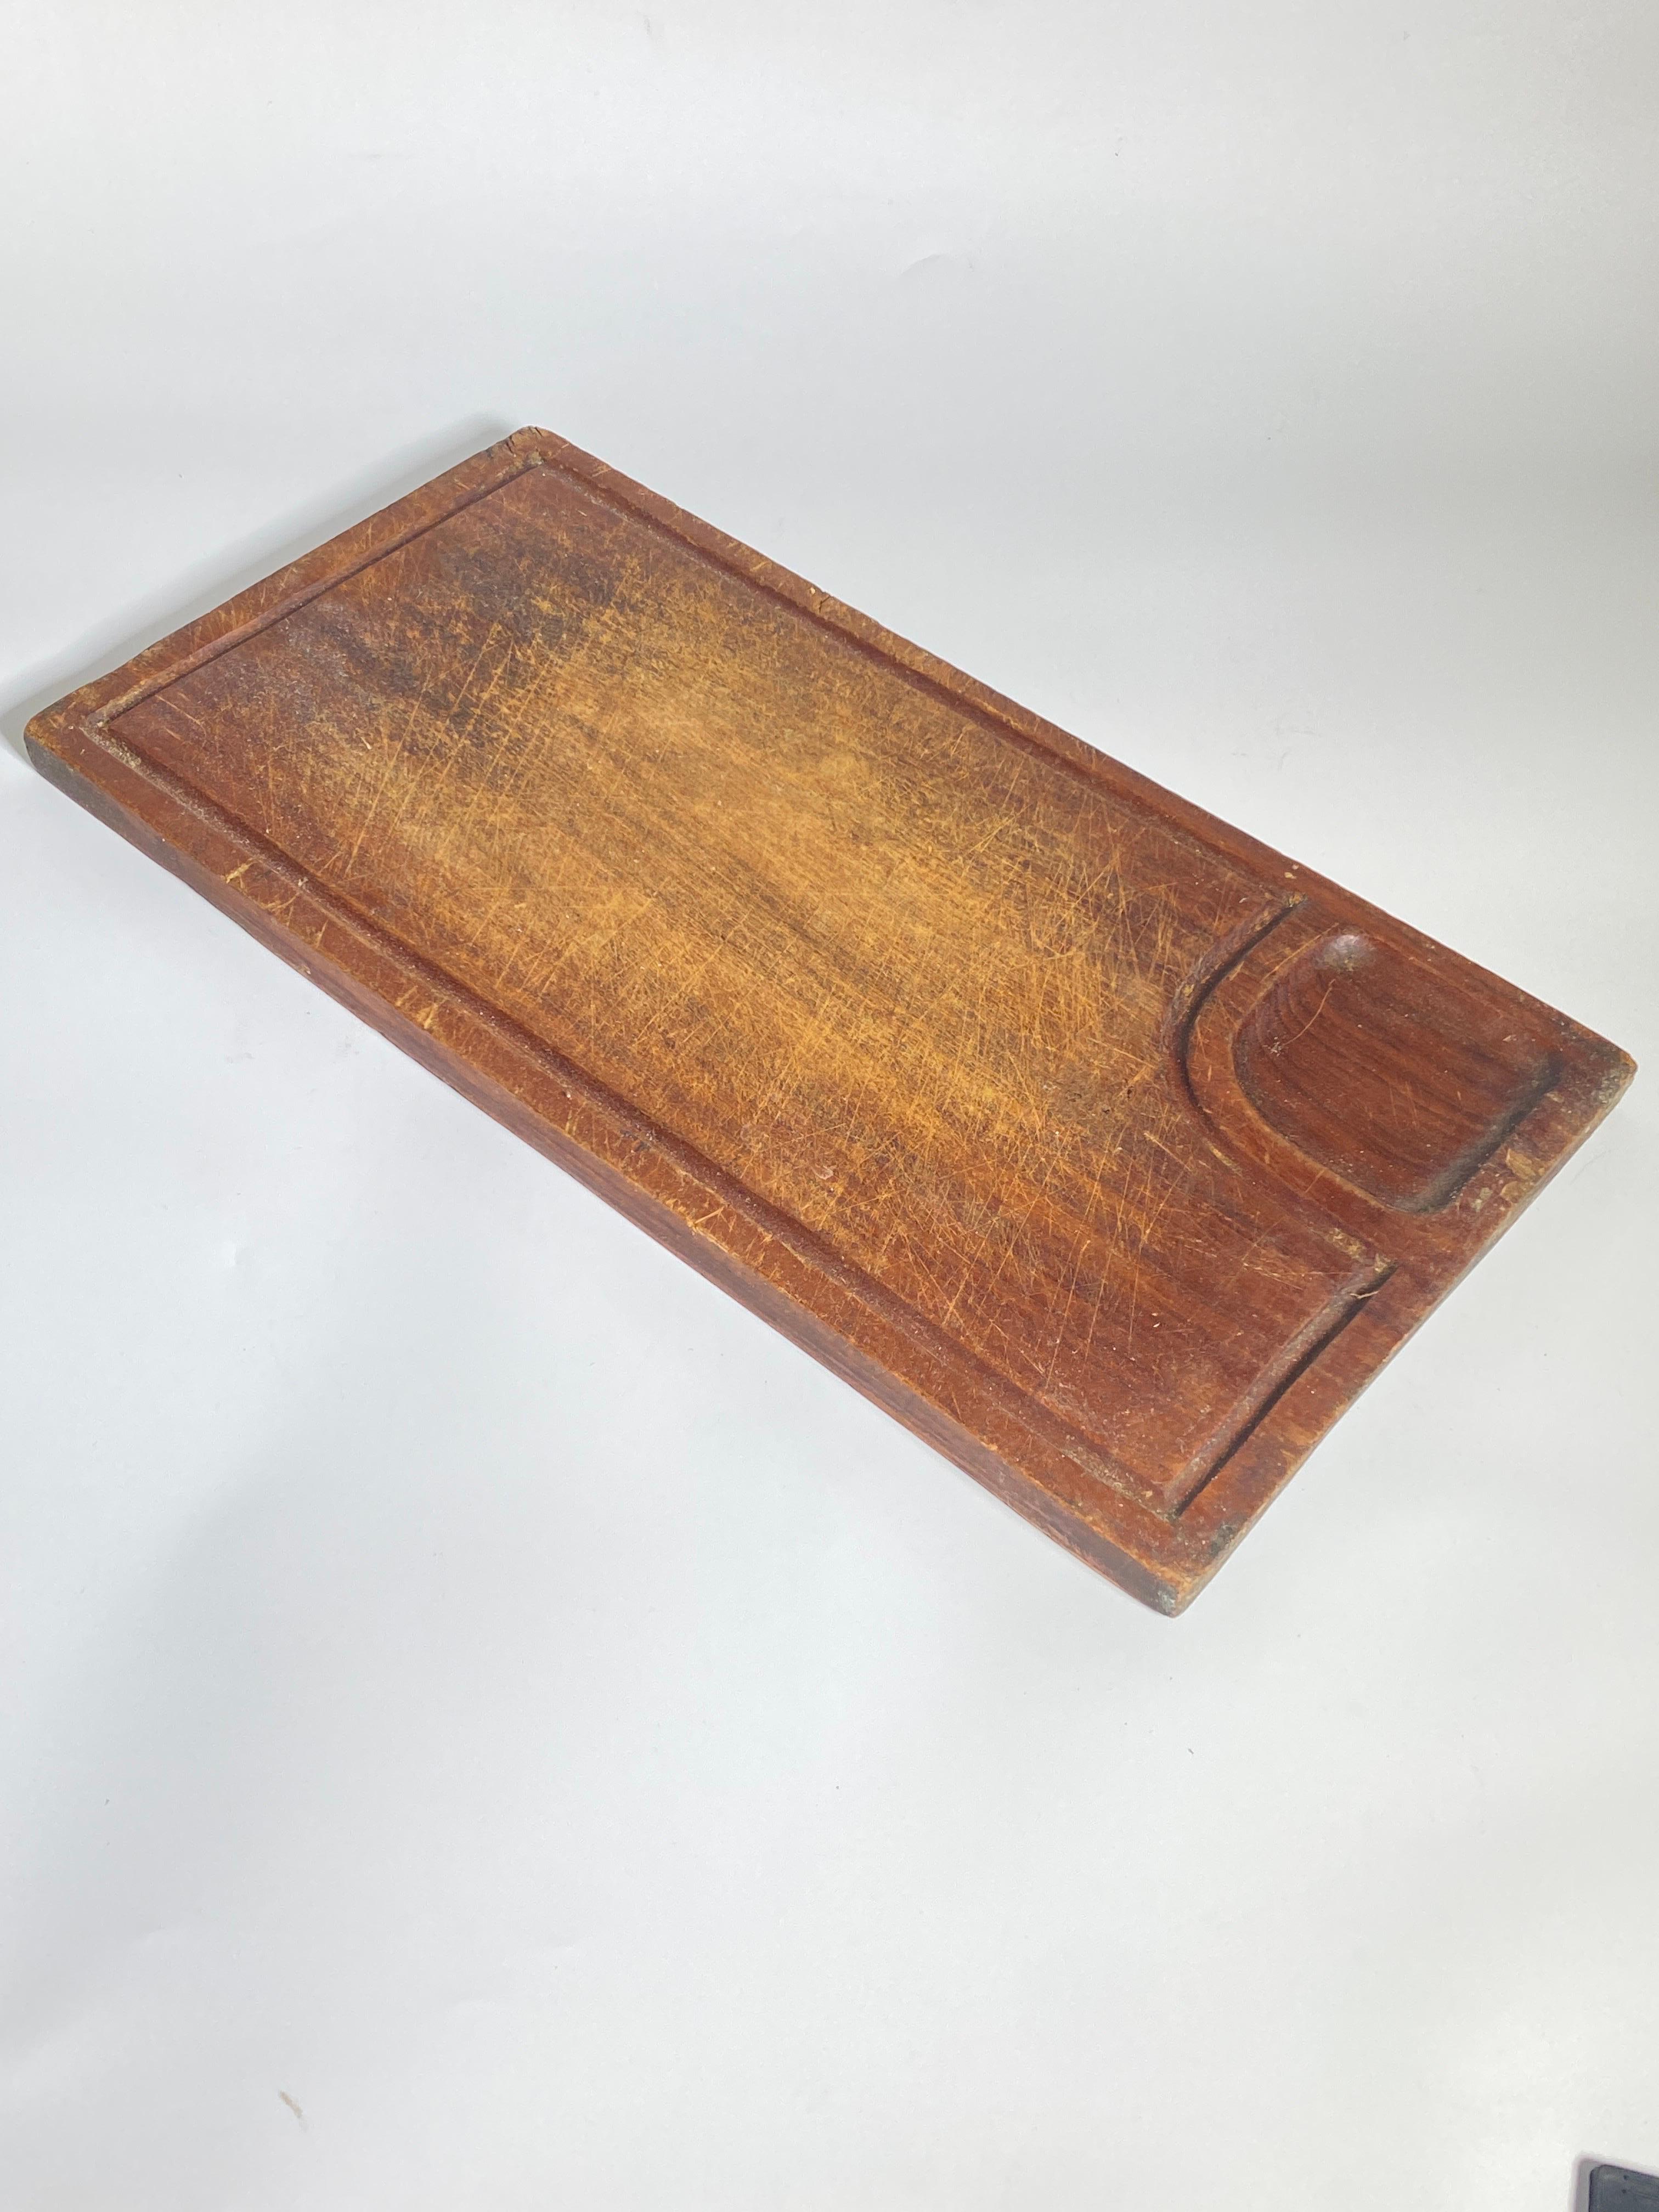 Wooden Chopping or Cutting Board, Old Patina, Brown Color French 20th Century For Sale 1